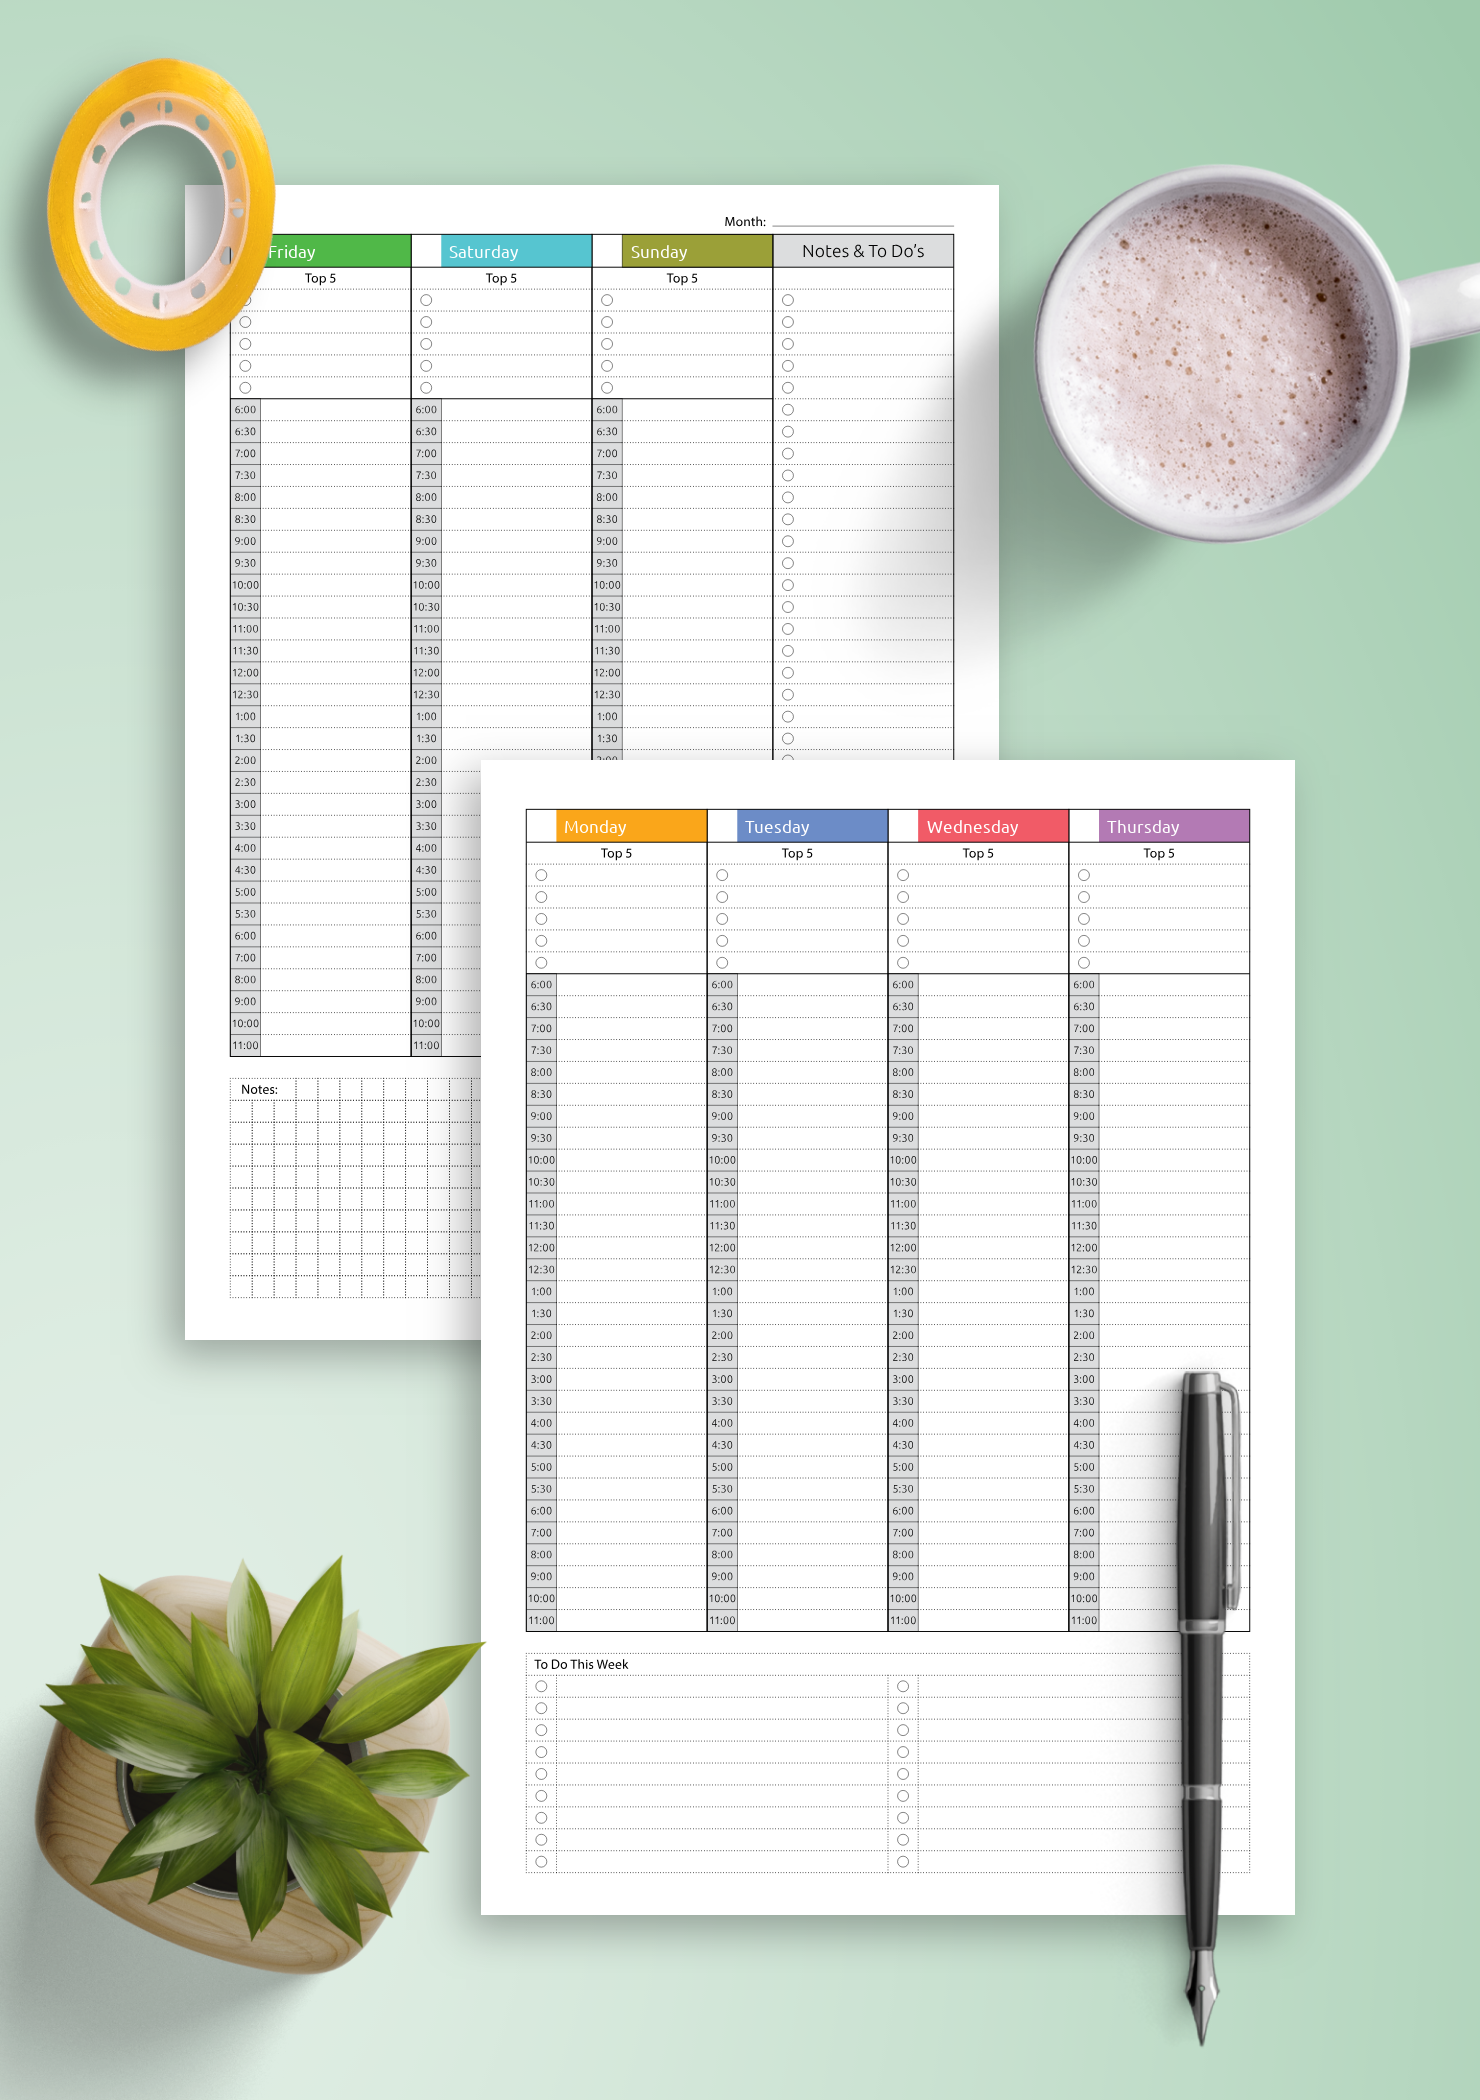 download-printable-multicolored-weekly-planner-with-todo-list-pdf